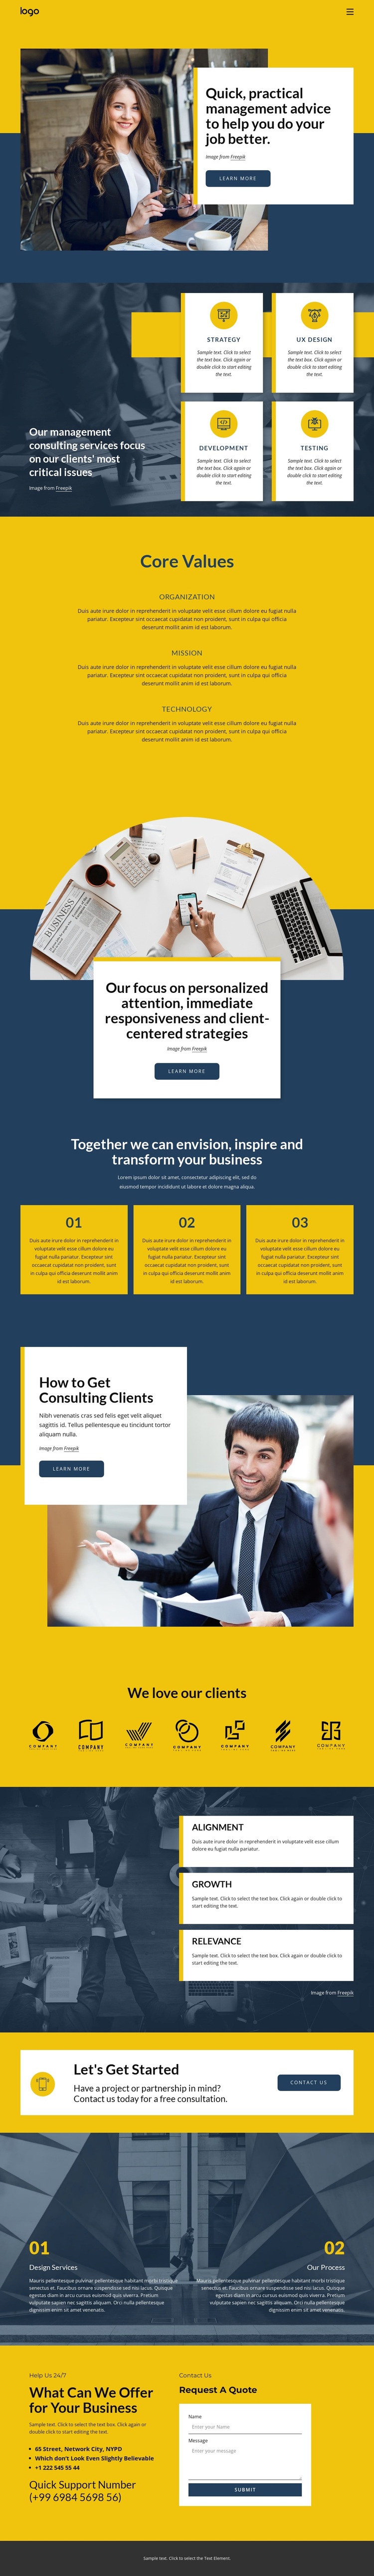 Business consulting firm Template